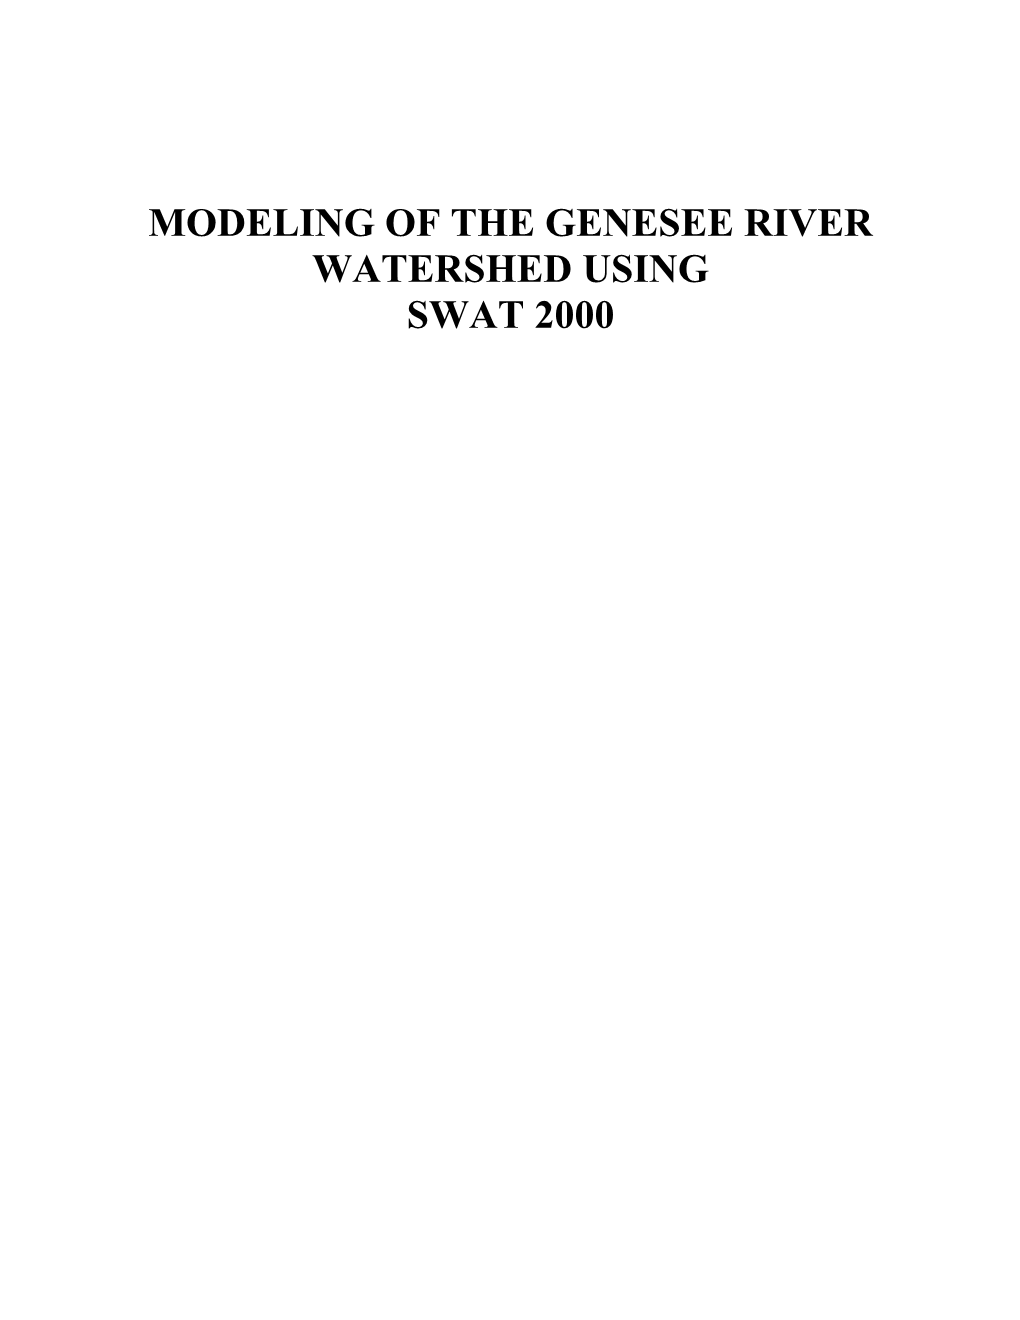 Modeling of the Genesee River Watershed Using Swat 2000